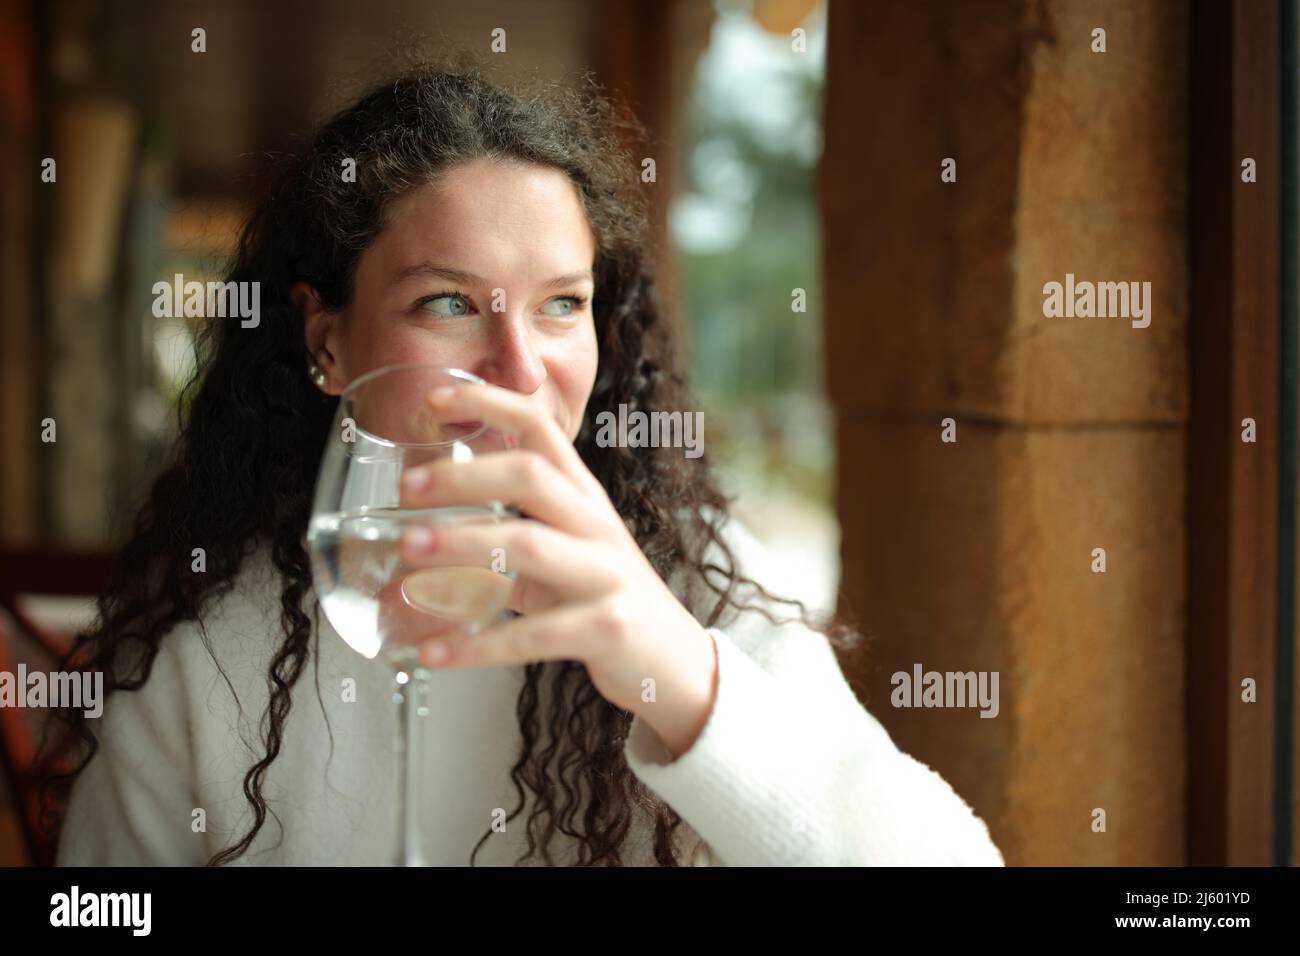 Happy woman holding glass of water looks through window in a restaurant interior Stock Photo